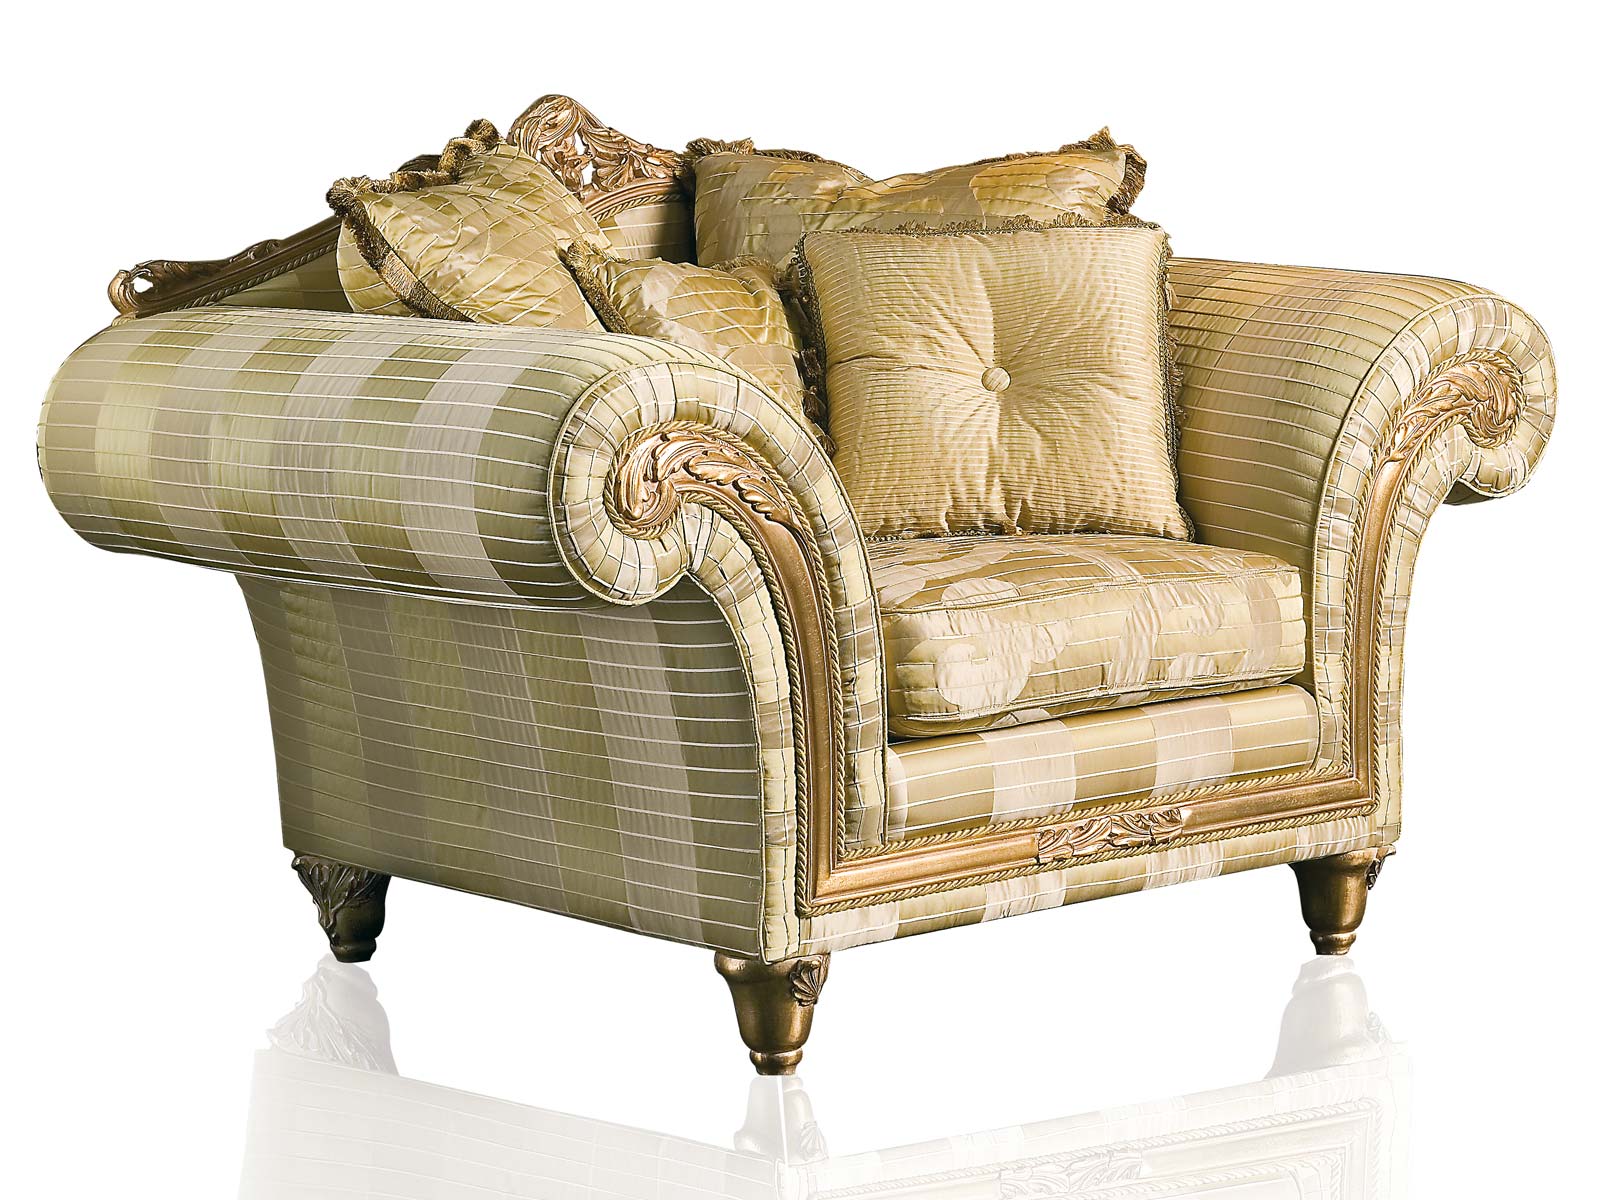 Luxury Classic Sofa and Armchairs - Imperial by Vimercati Media - DigsDigs